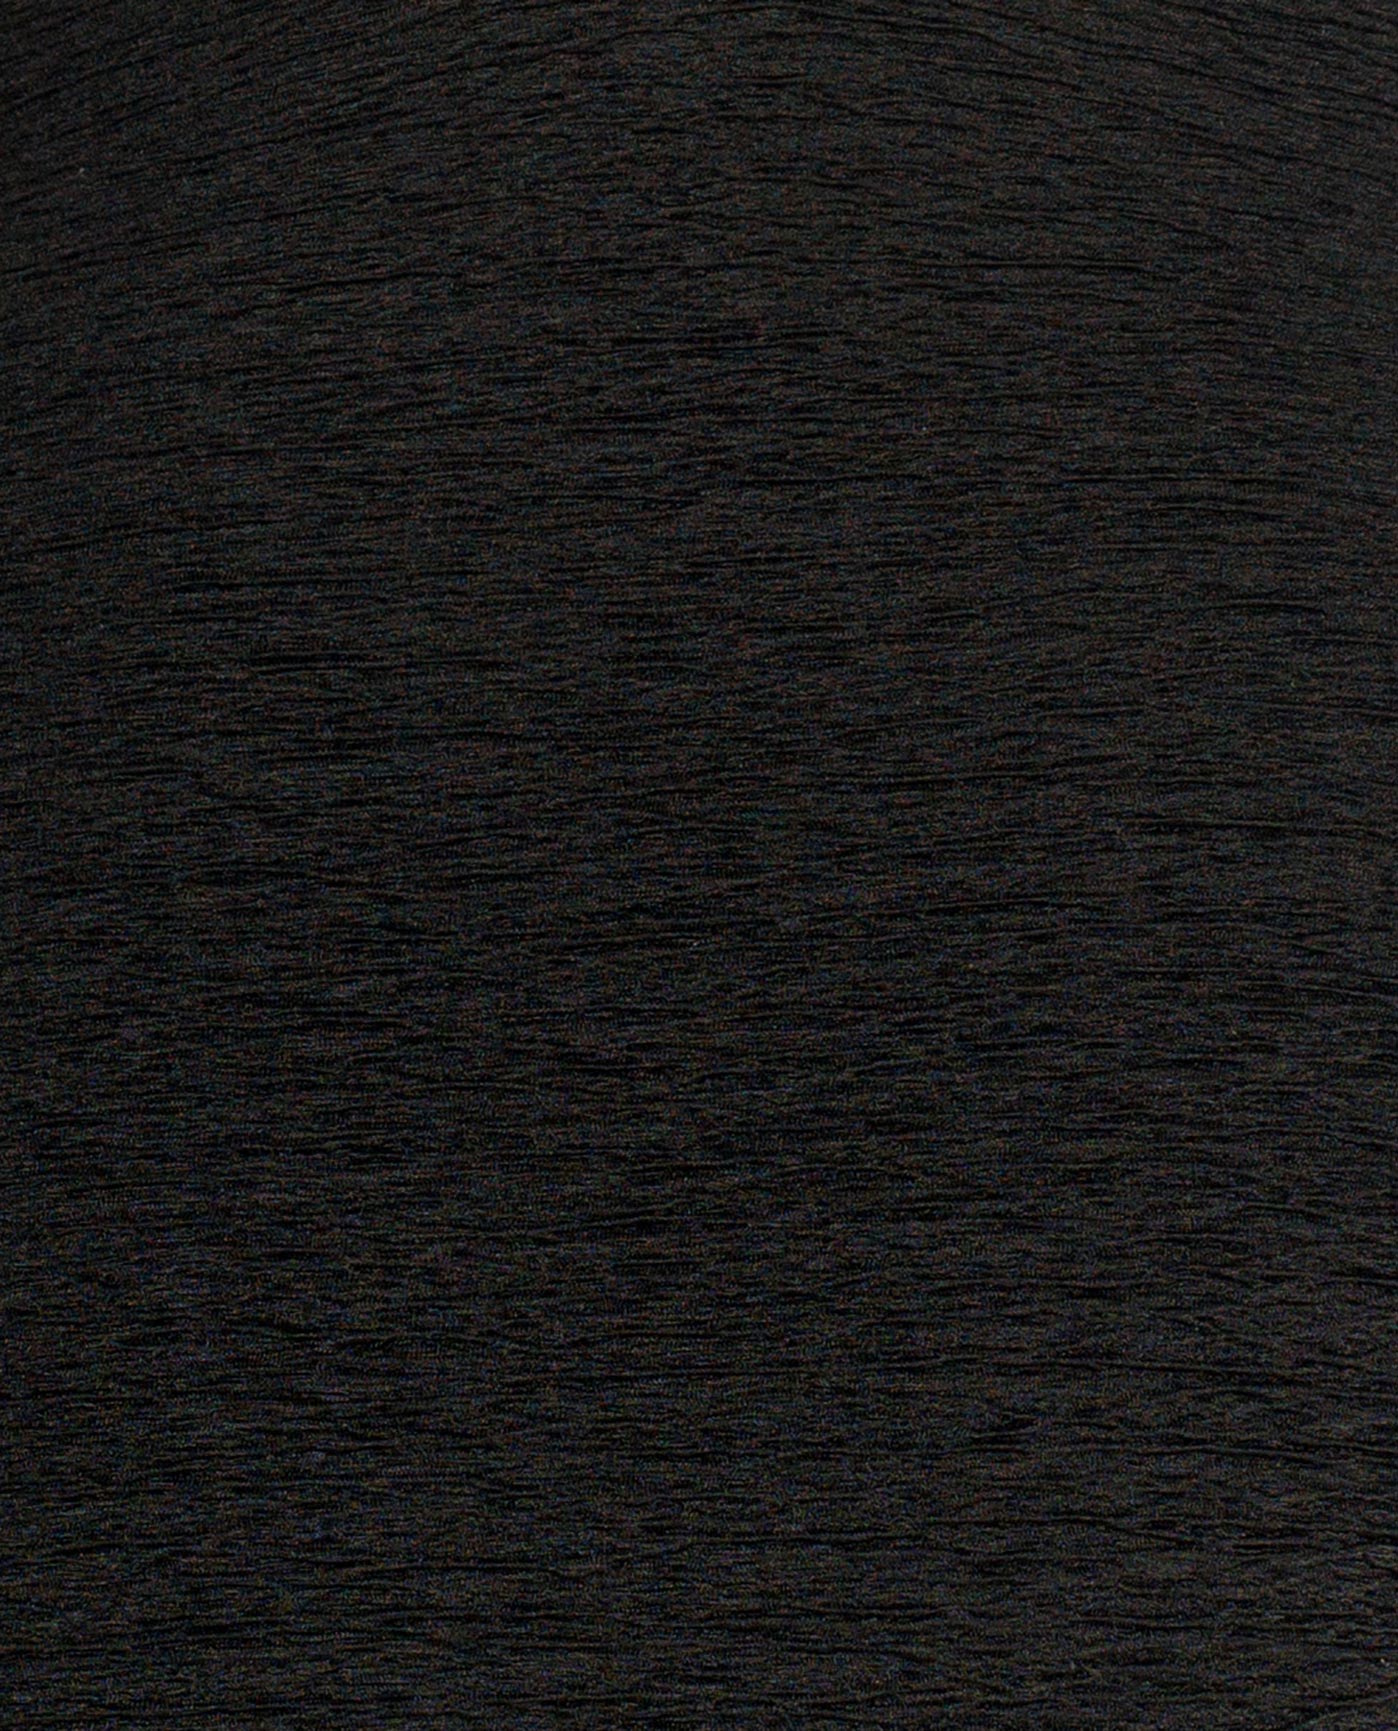 FABRIC SWATCH VIEW OF CHLORINE RESISTANT KRINKLE TEXTURED SOLID ACTIVE BACK ONE PIECE | KRINKLE BLACK 2023